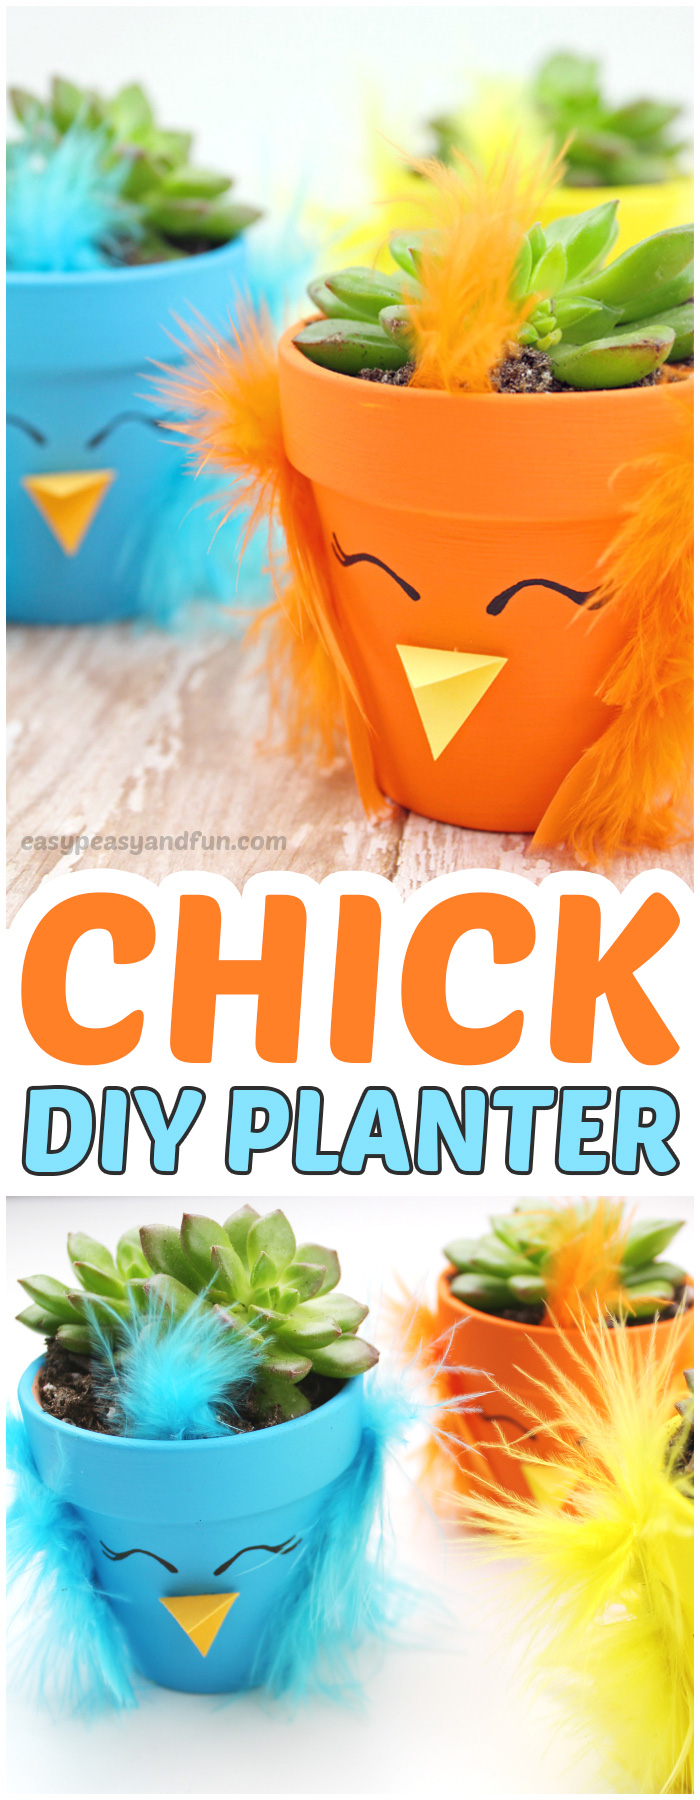 DIY Easter Chick Growers.  A very fun Easter craft activity for kids to make.  #craftsforkids #Eastercrafts #activitiesforkids